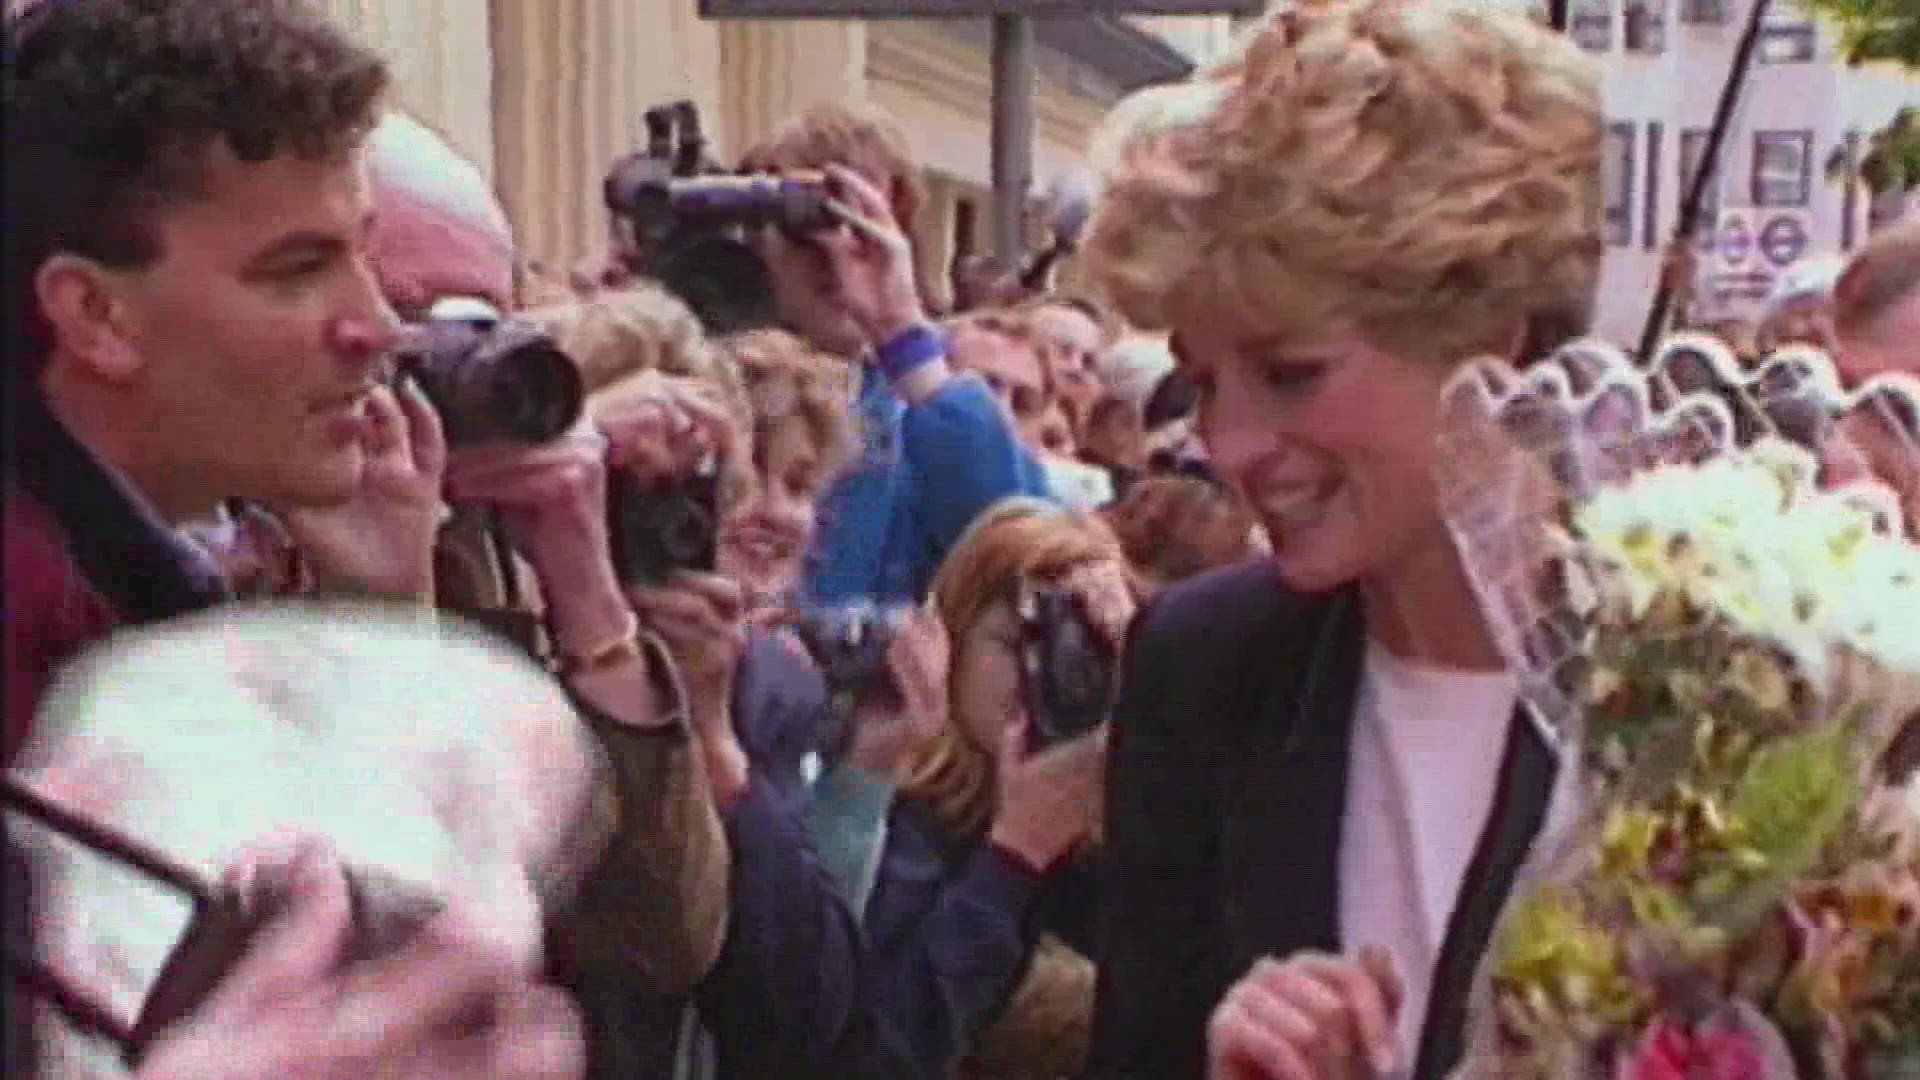 Princess Diana was 36 when she died after being chased through the French capital by paparazzi.